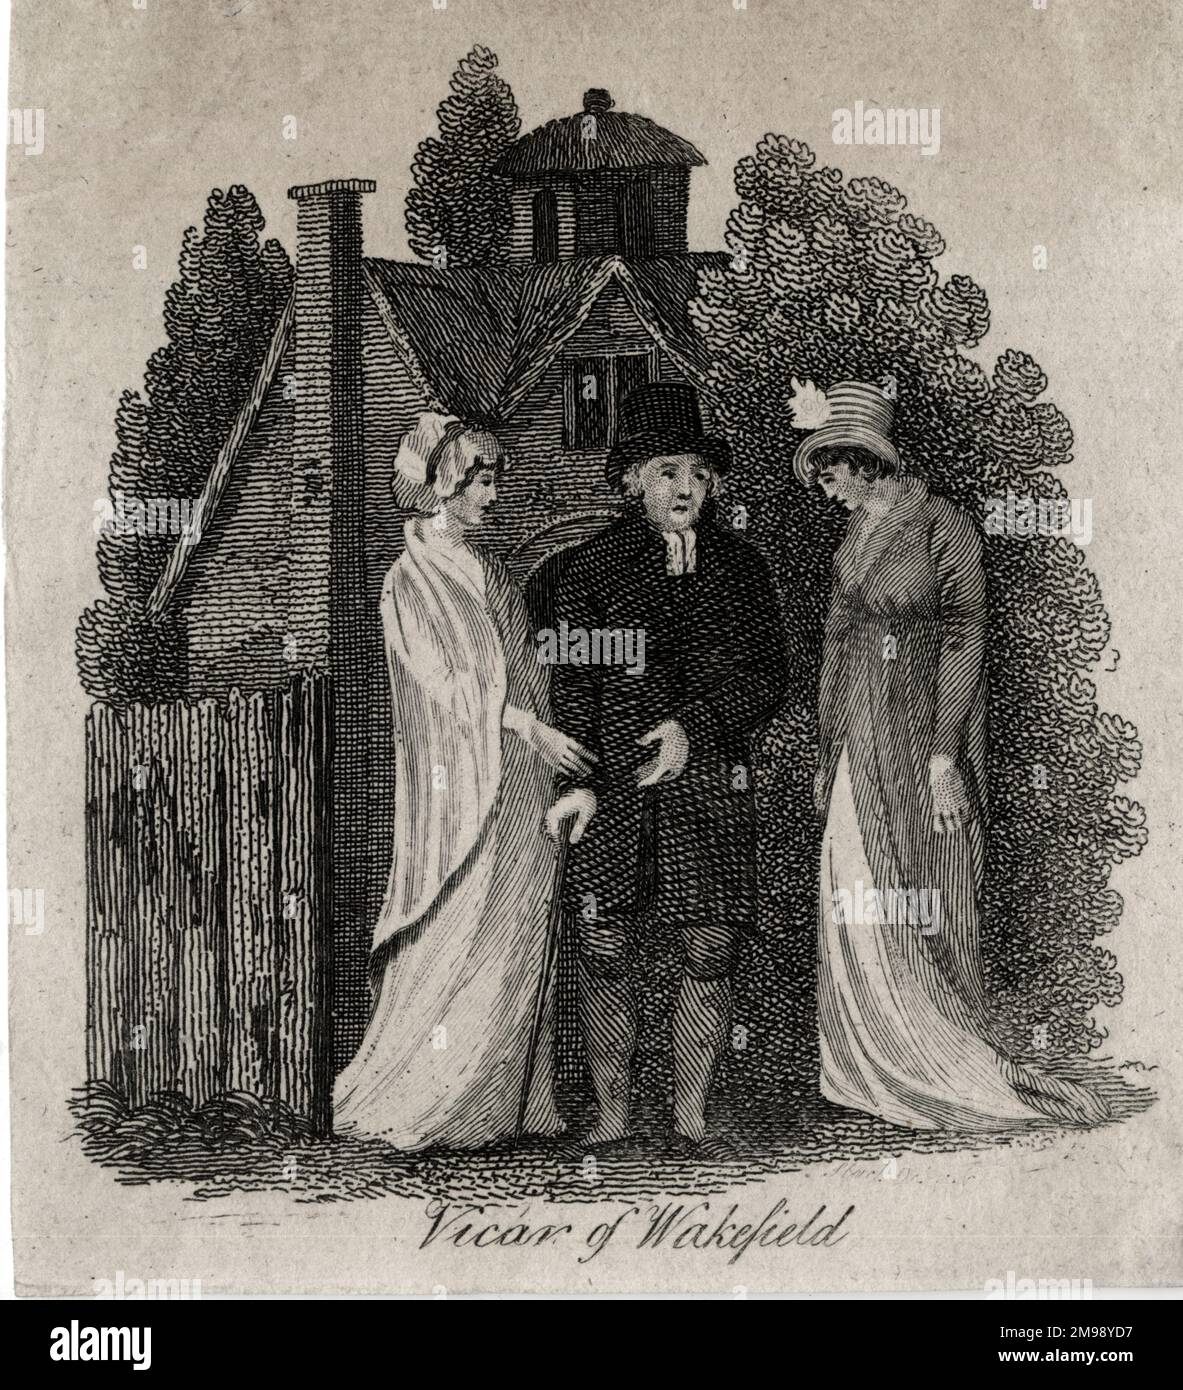 Illustration, The Vicar of Wakefield, a novel by Oliver Goldsmith. Stock Photo